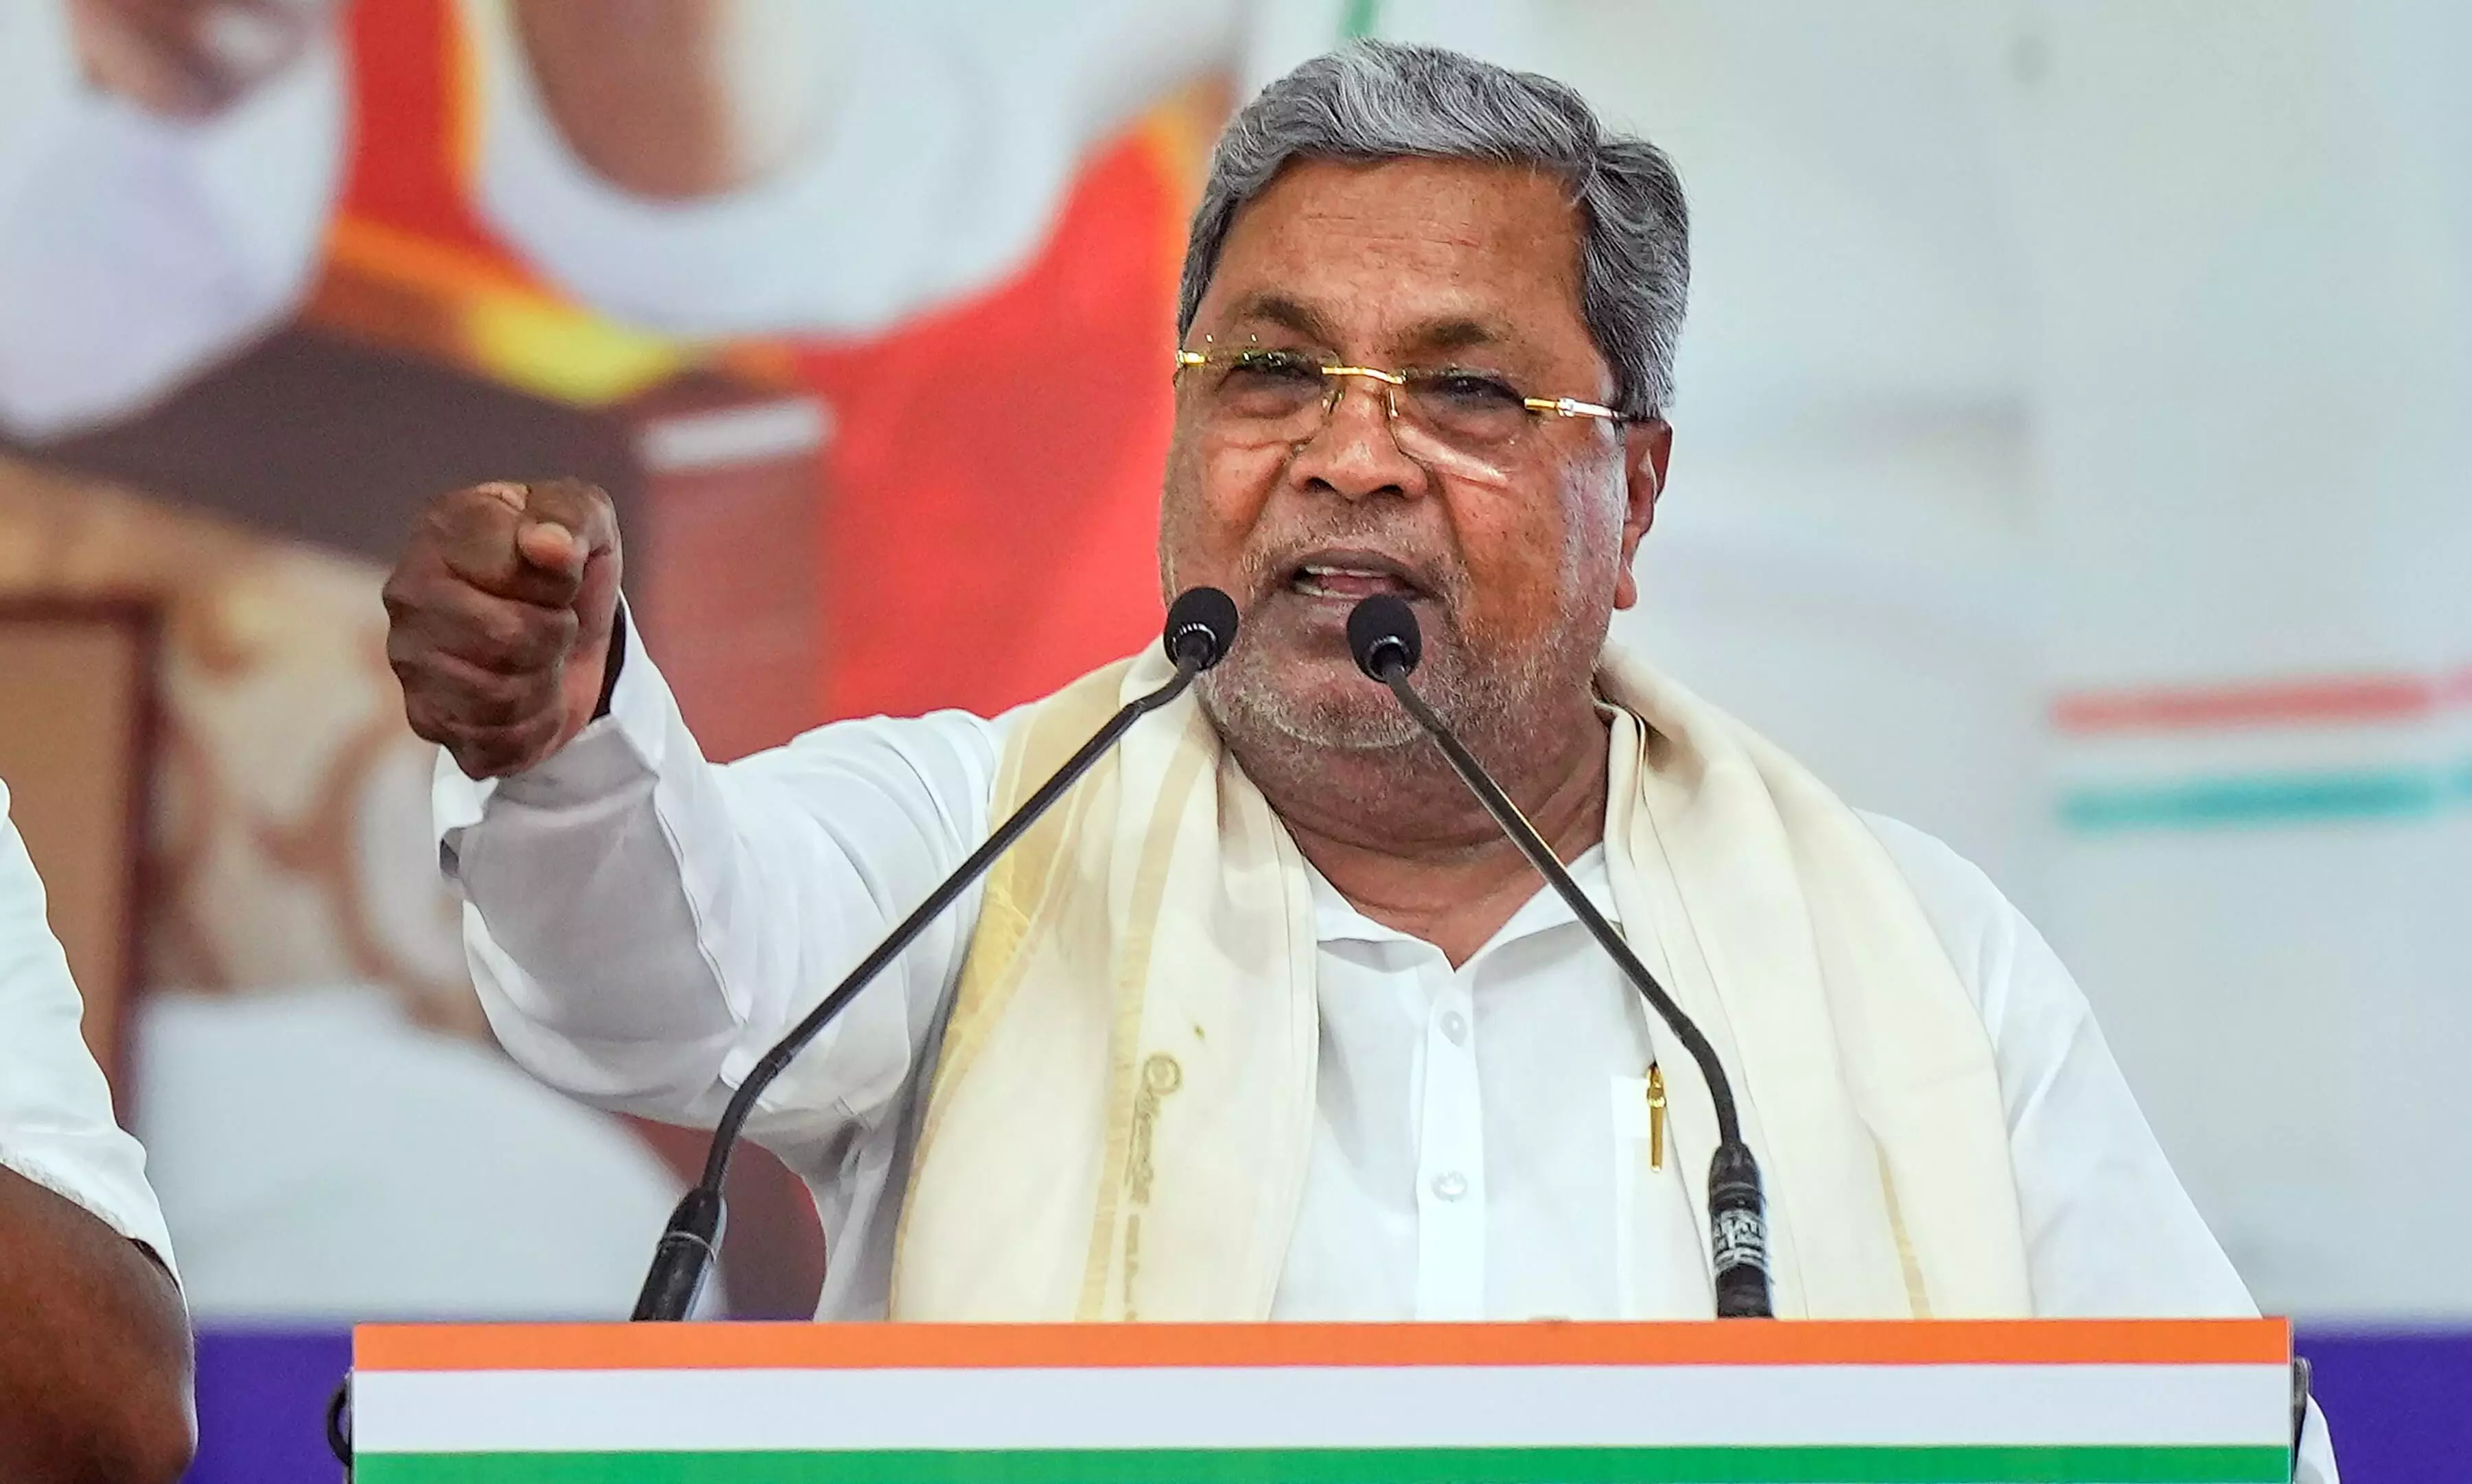 Law student gifts Siddaramaiah garland of free bus tickets in Shakti Effect